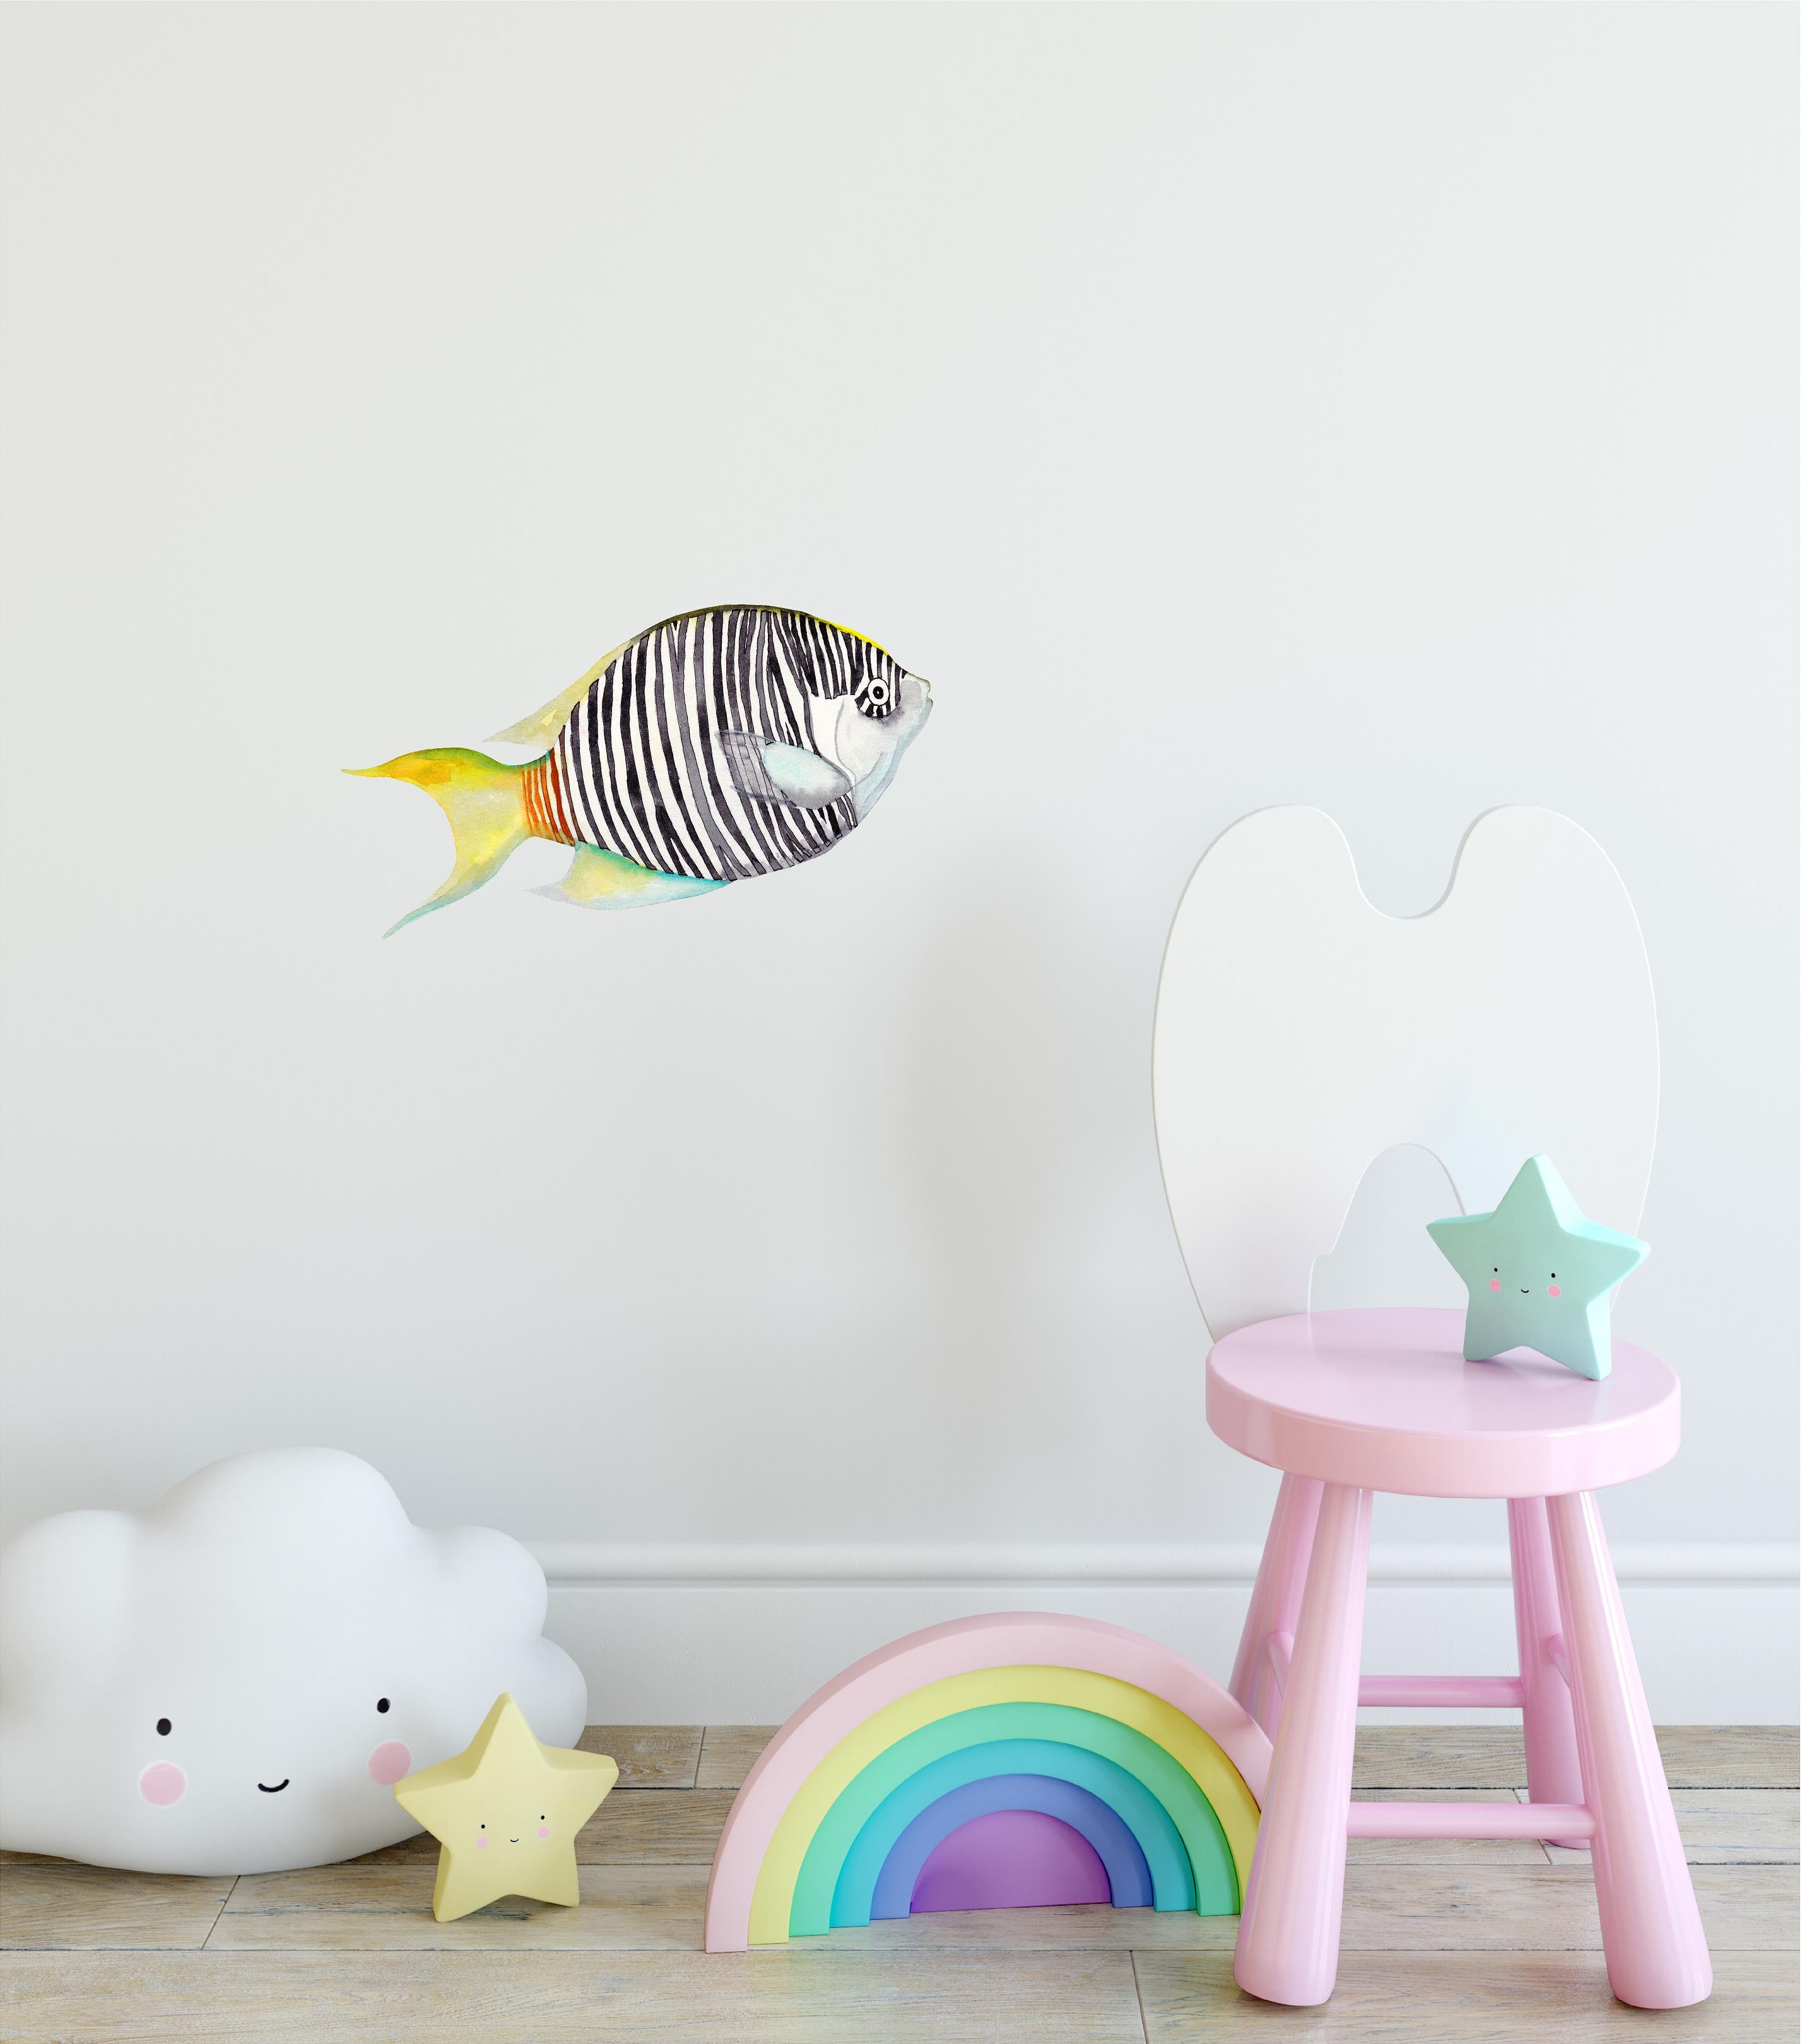 Zebra Angelfish Wall Decal Tropical Fish Ocean Sea Life Removable Fabric Wall Sticker | DecalBaby